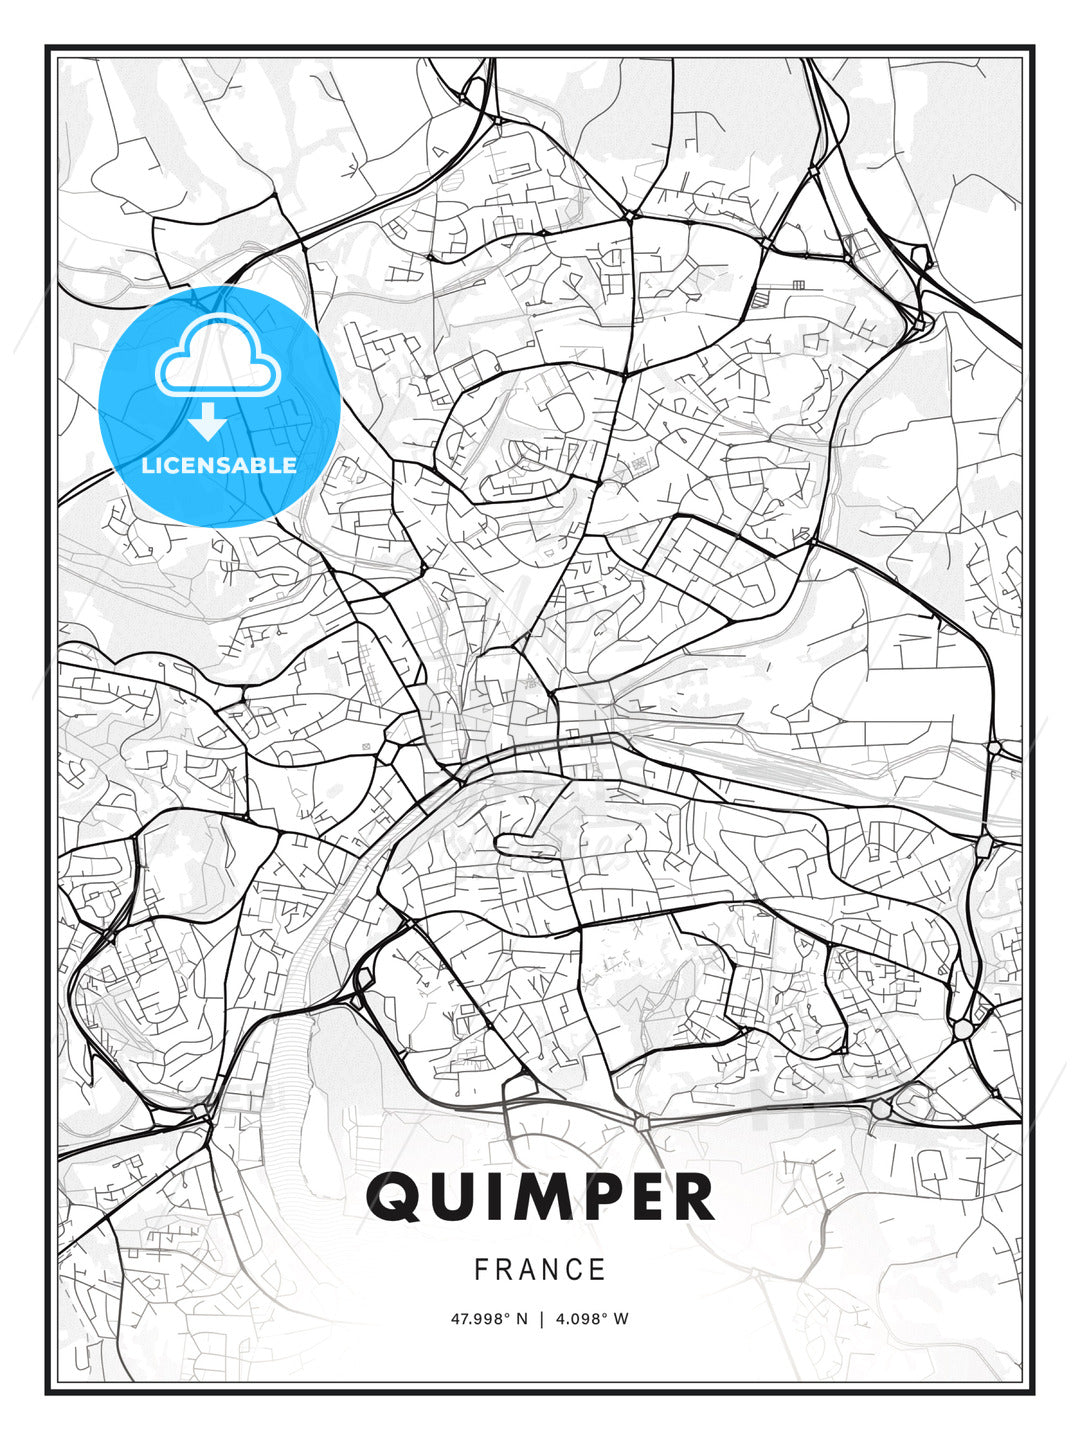 Quimper, France, Modern Print Template in Various Formats - HEBSTREITS Sketches